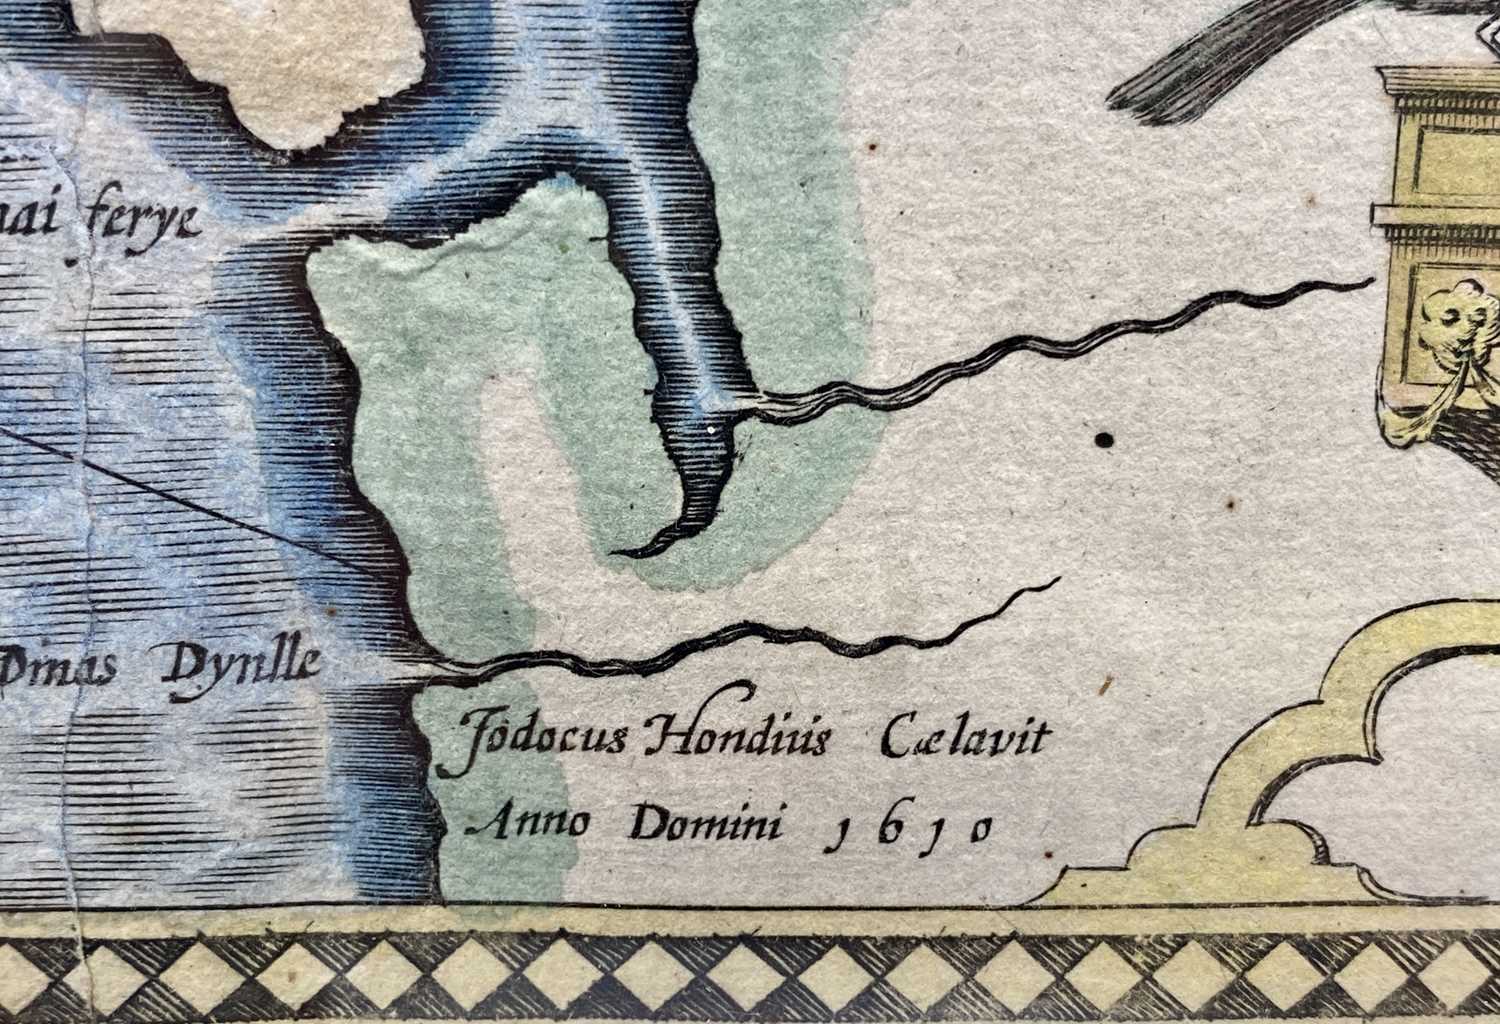 JOHN SPEED hand coloured engraved map circa 1610 - Anglesey with inset town plan of Beaumaris, 39 - Image 3 of 3